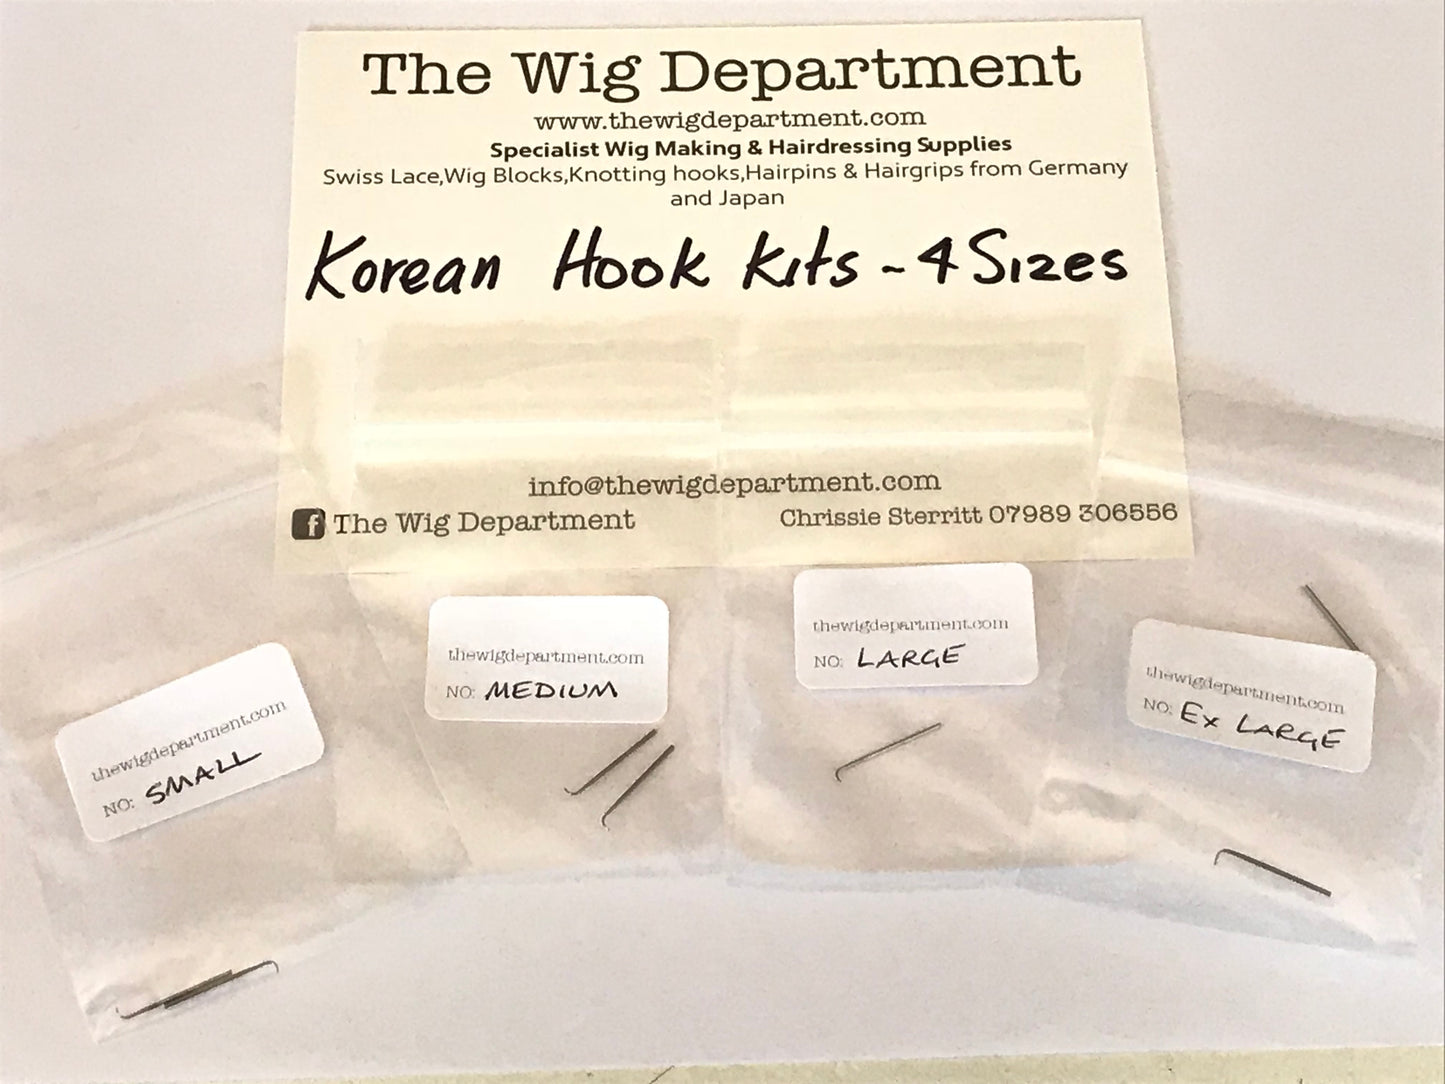 Korean small hook kit 4 Sizes - The Wig Department